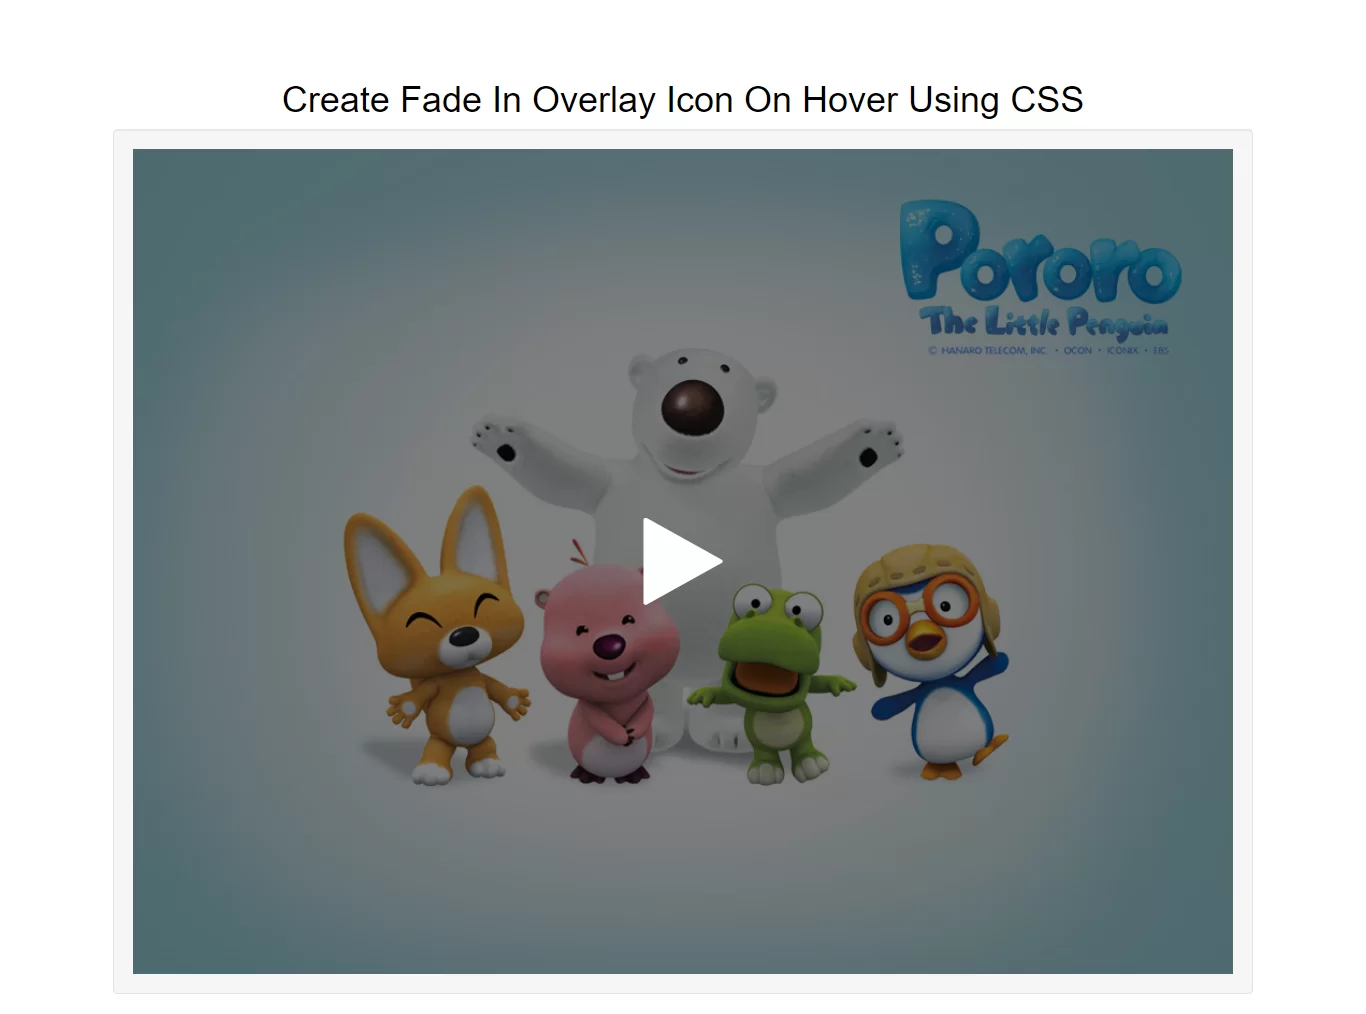 How To Create Fade In Overlay Icon On Hover Using CSS